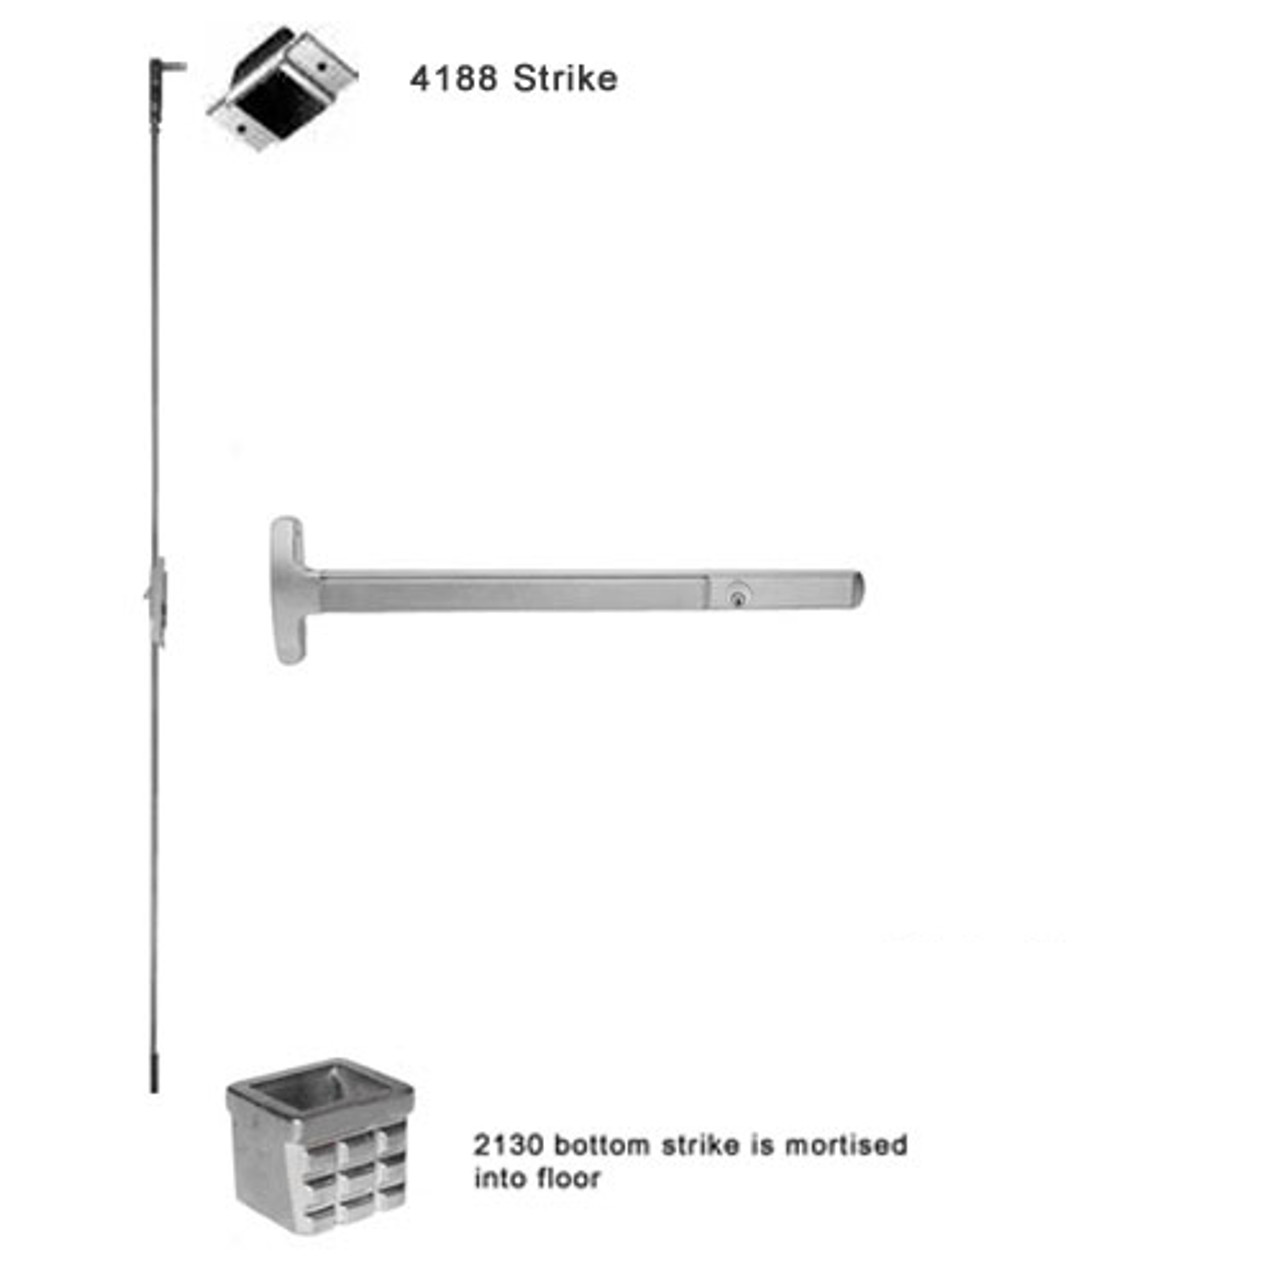 CD24-C-L-DANE-US19-3-LHR Falcon 24 Series Concealed Vertical Rod Device with 712L Dane Lever Trim in Flat Black Painted